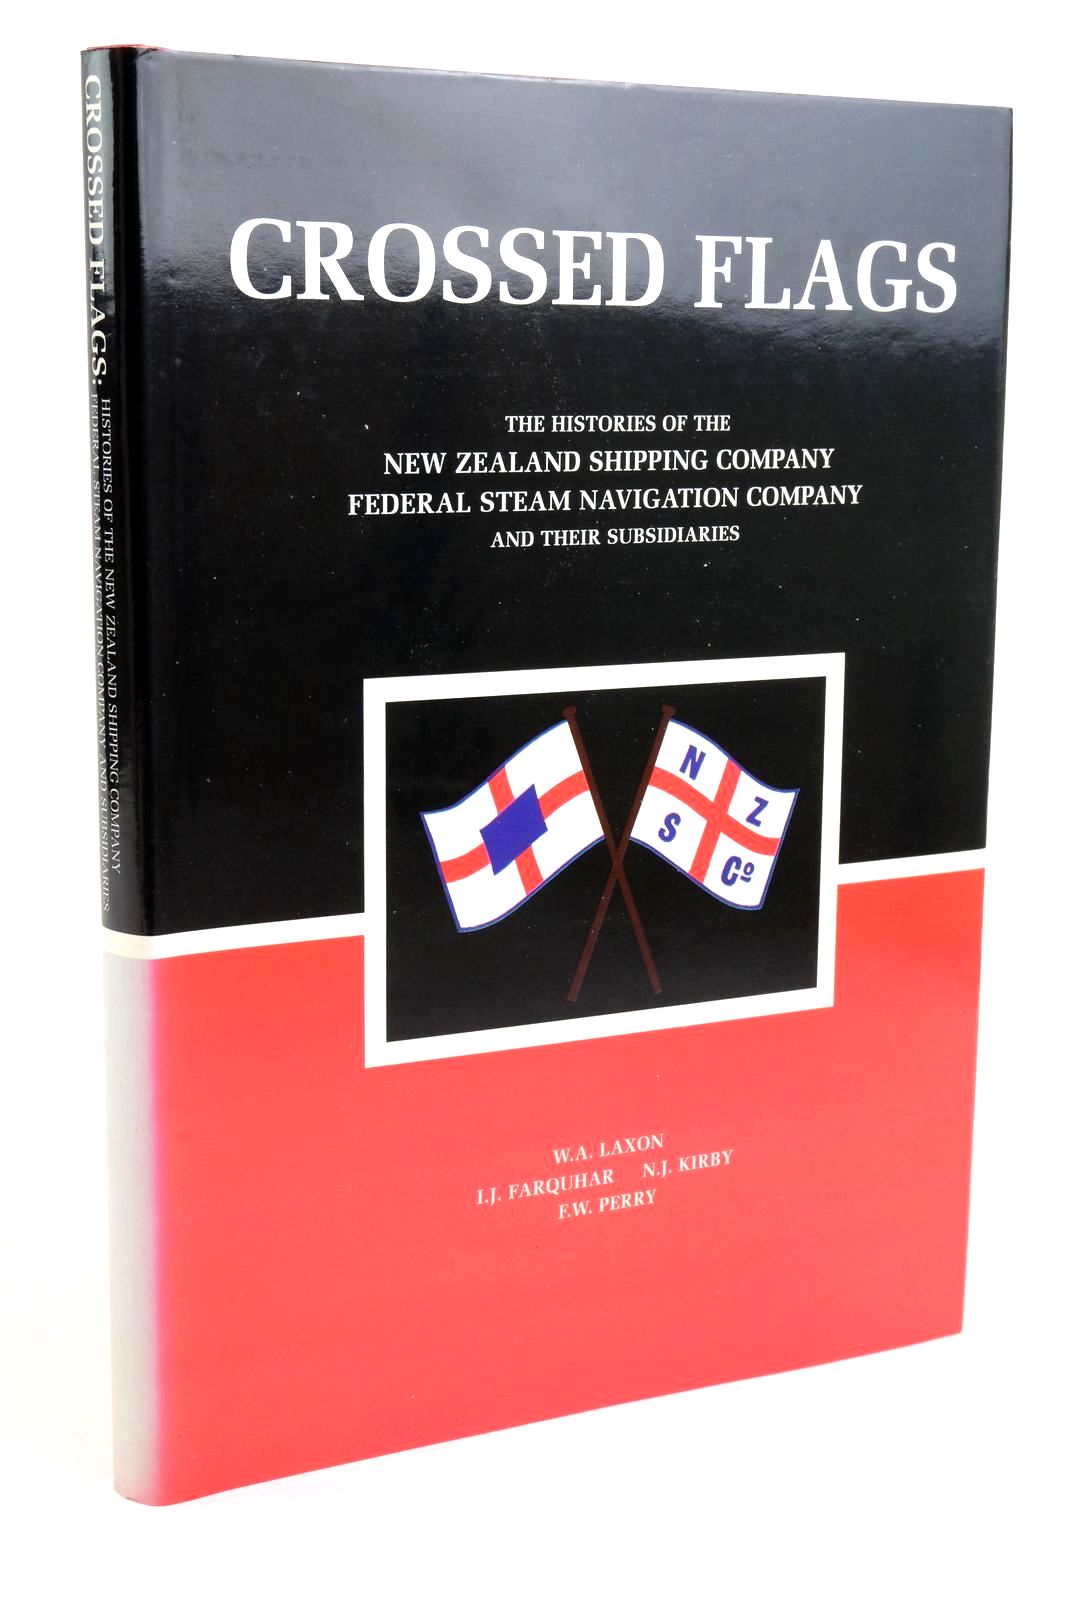 Photo of CROSSED FLAGS written by Laxon, W.A. Farquhar, I.J. Kirby, N.J. Perry, F.W. published by World Ship Society (STOCK CODE: 1322176)  for sale by Stella & Rose's Books